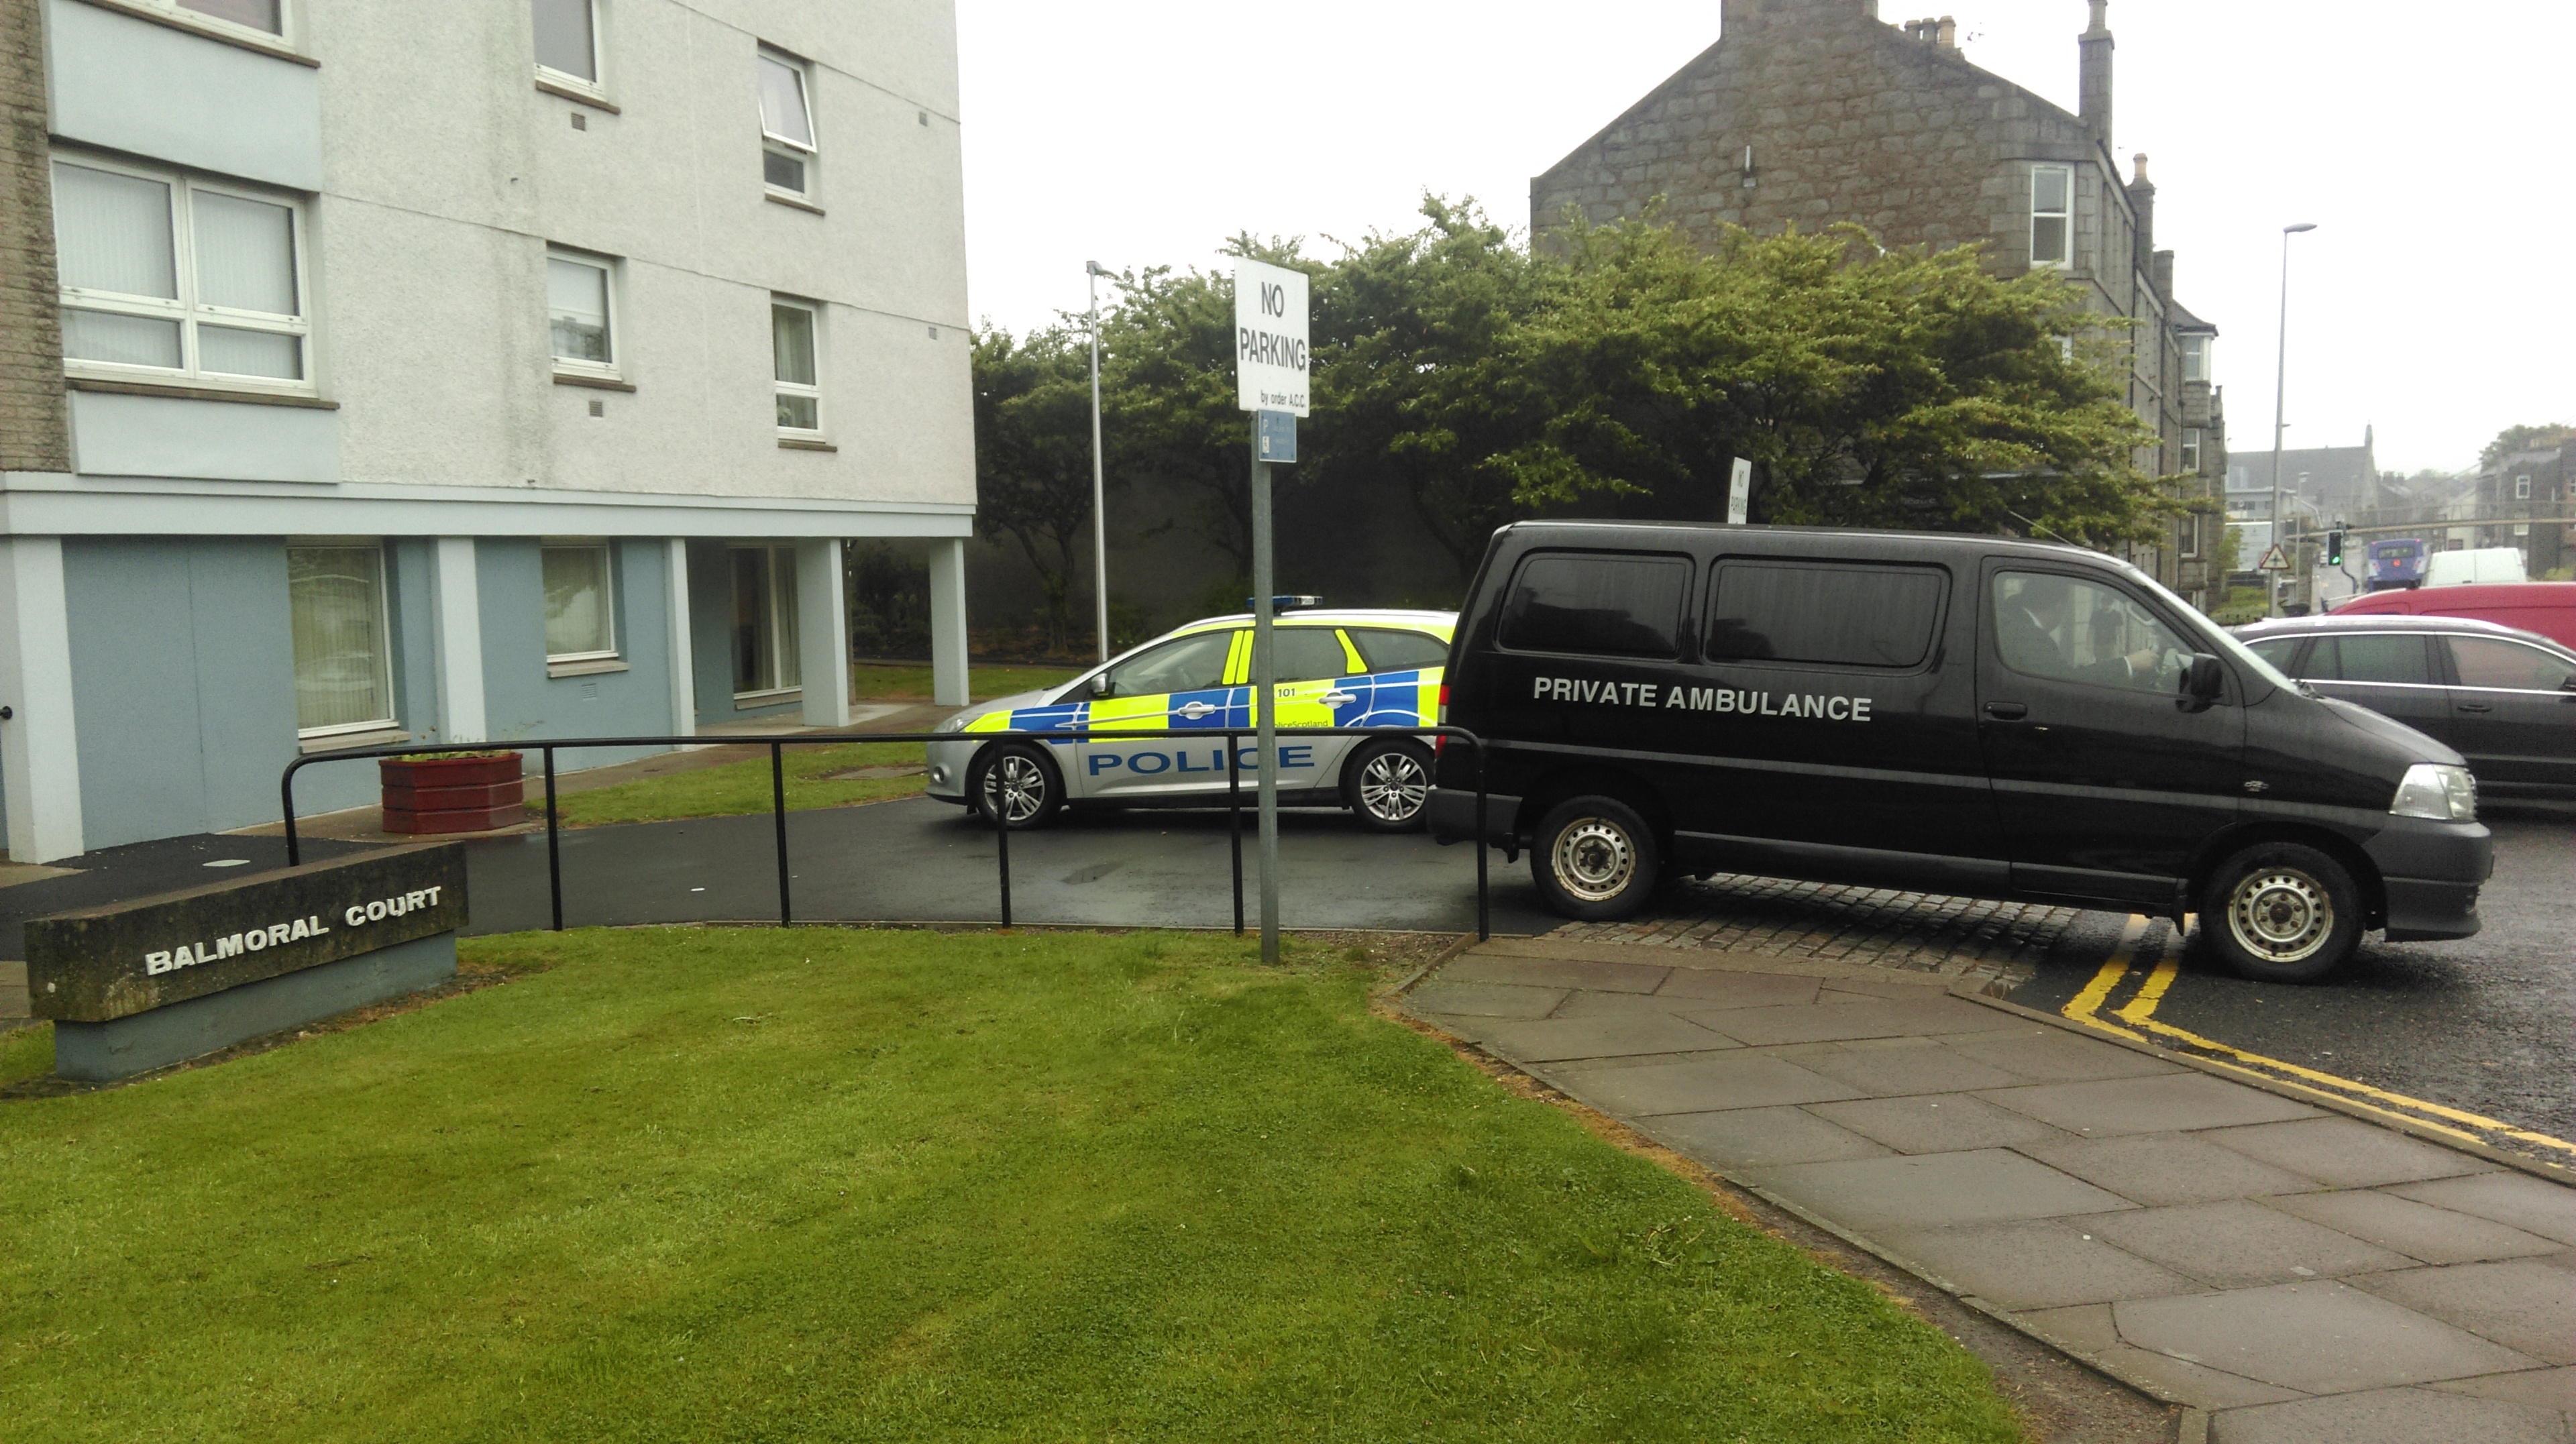 Police at the scene at Balmoral Court.